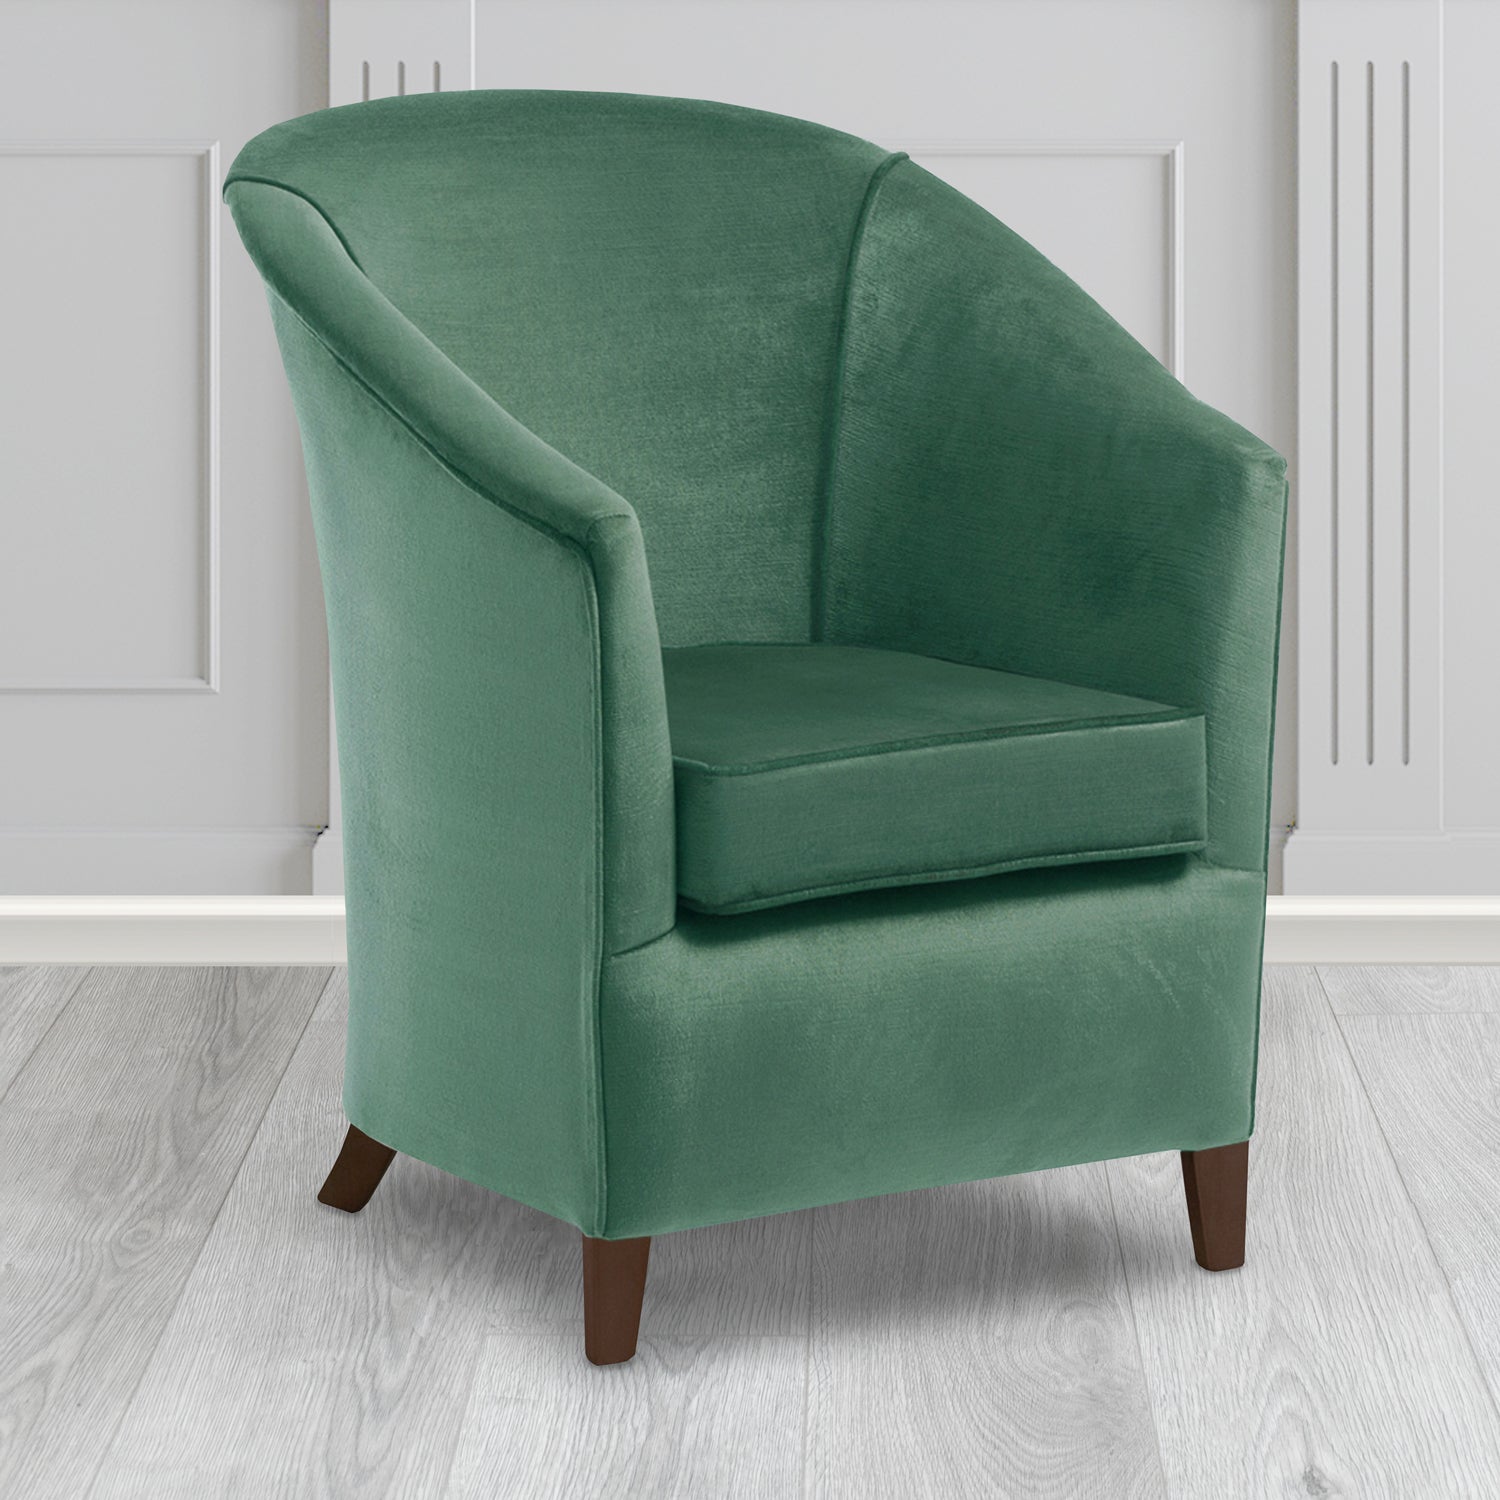 Bolton Tub Chair in Noble 129 Ocean Crib 5 Velvet Fabric - Water Resistant - The Tub Chair Shop